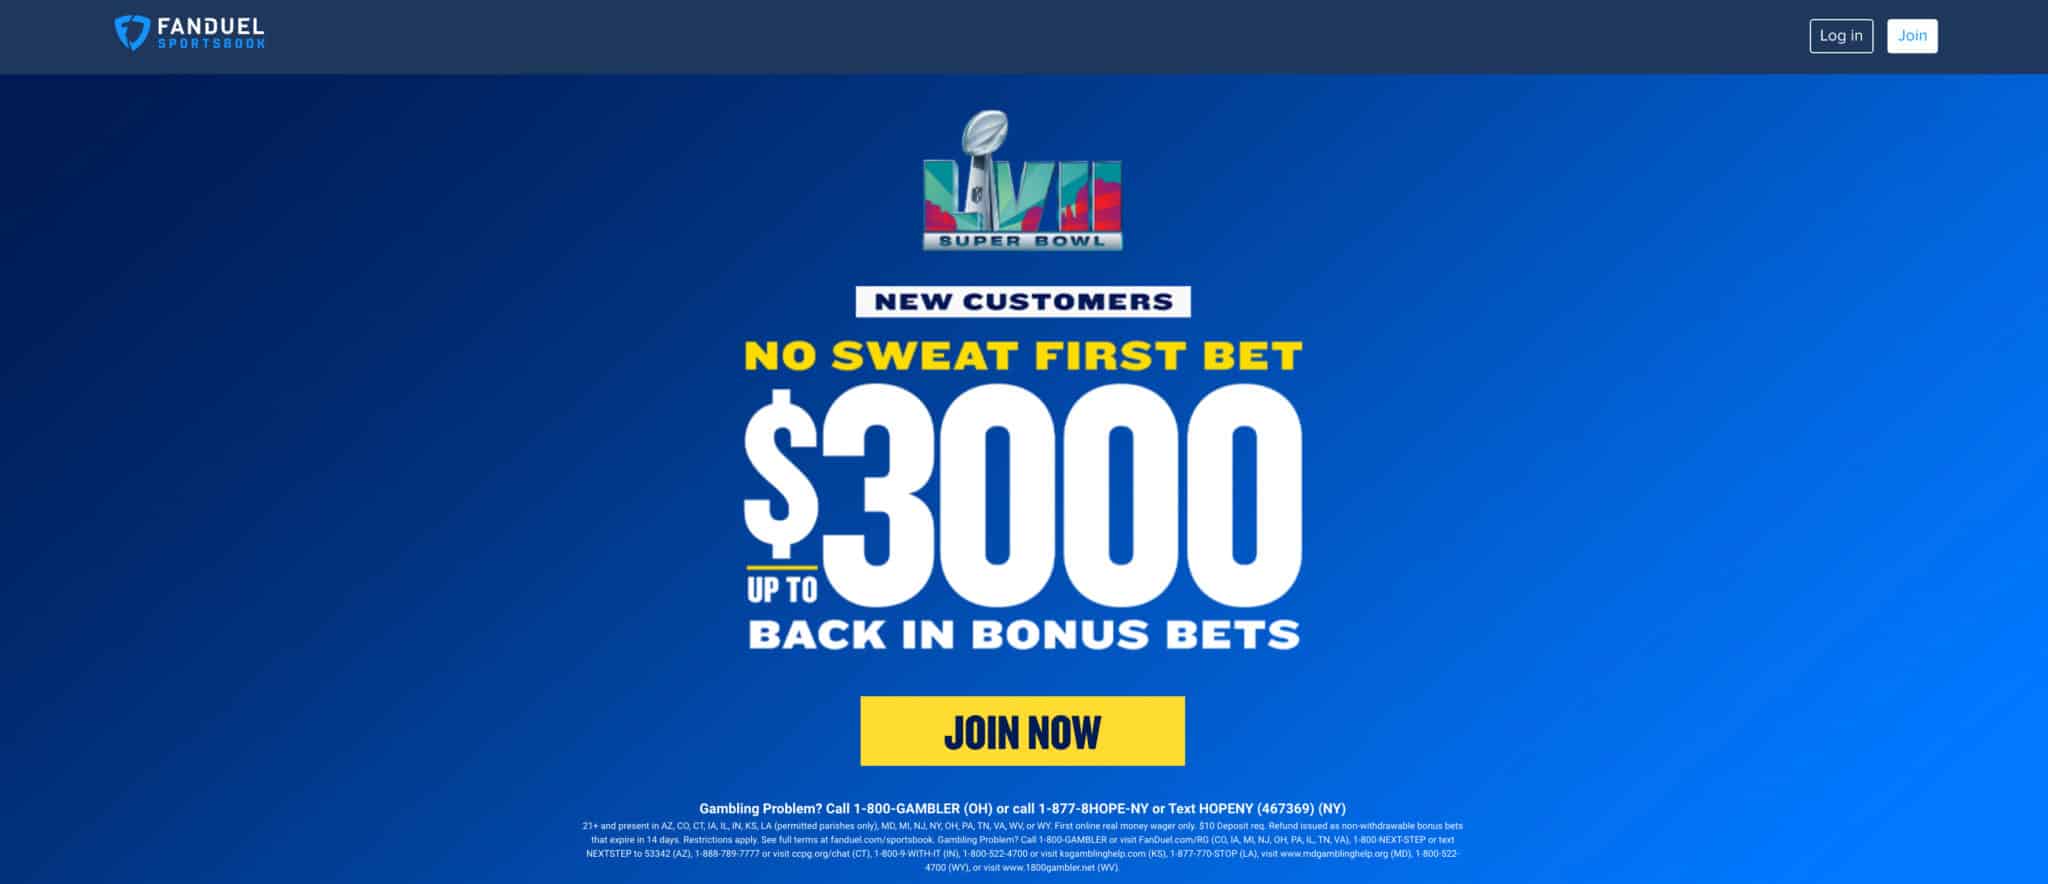 FanDuel Promo Code, $3,000 No-Sweat First Bet, Join Now